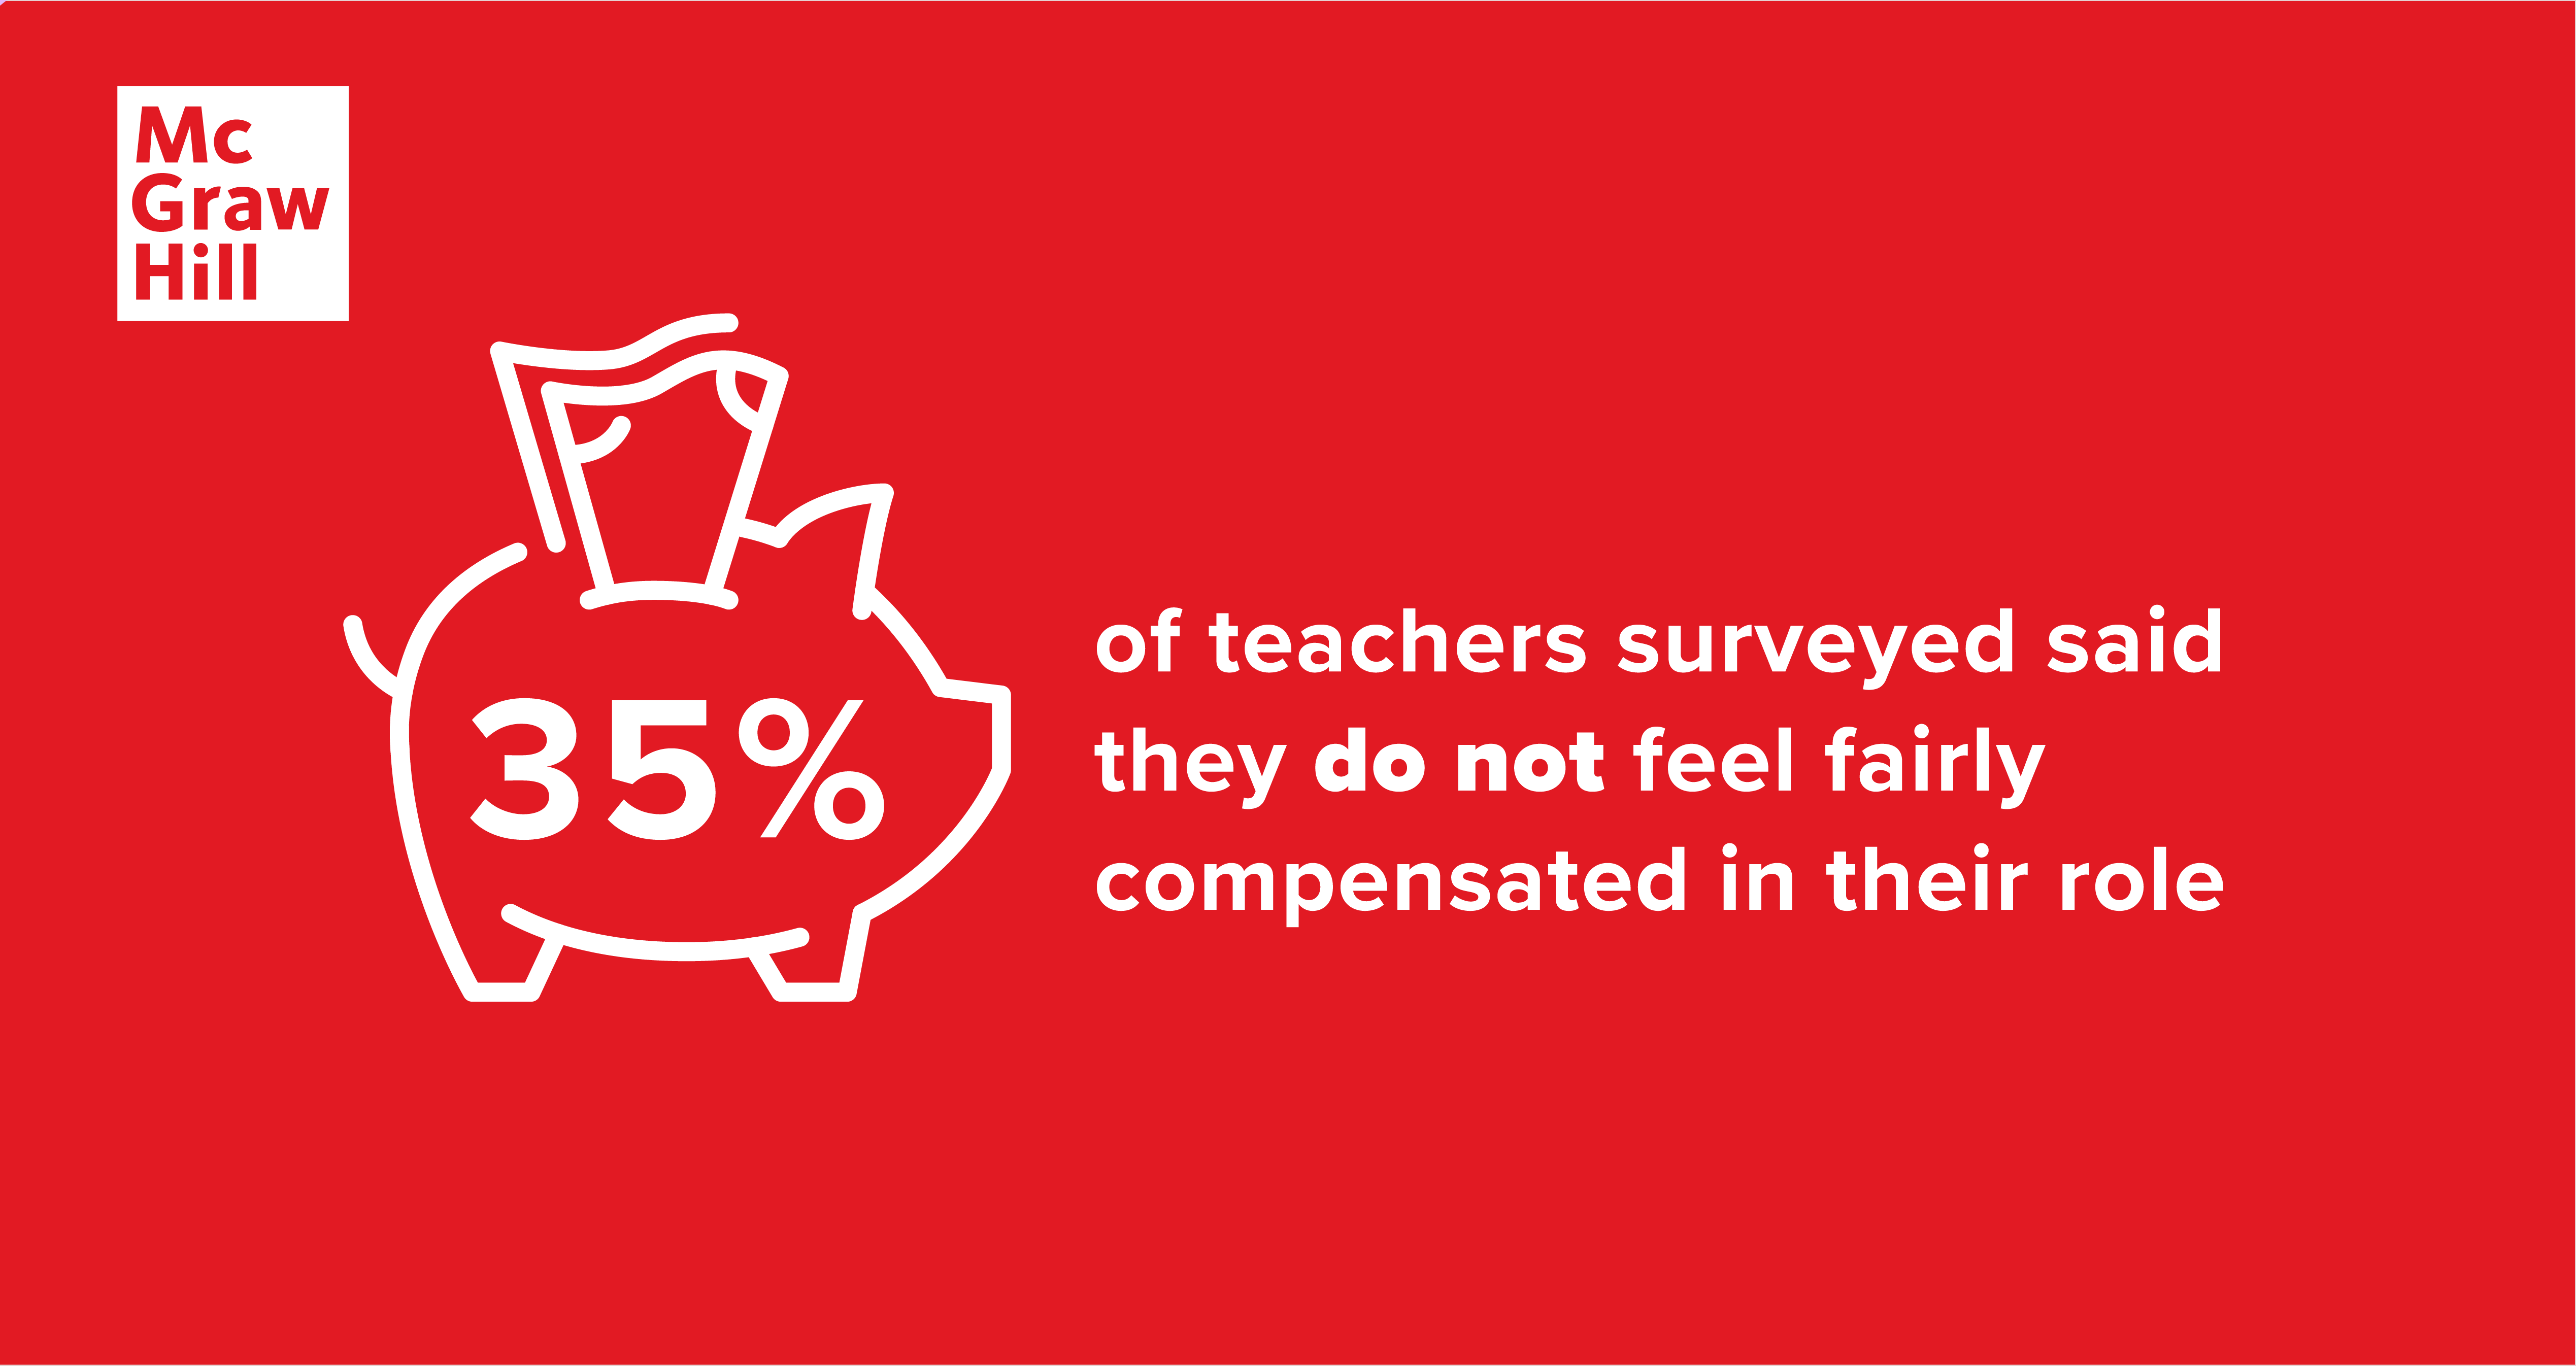 35% of teachers surveyed said they do not feel fairly compensated for their role